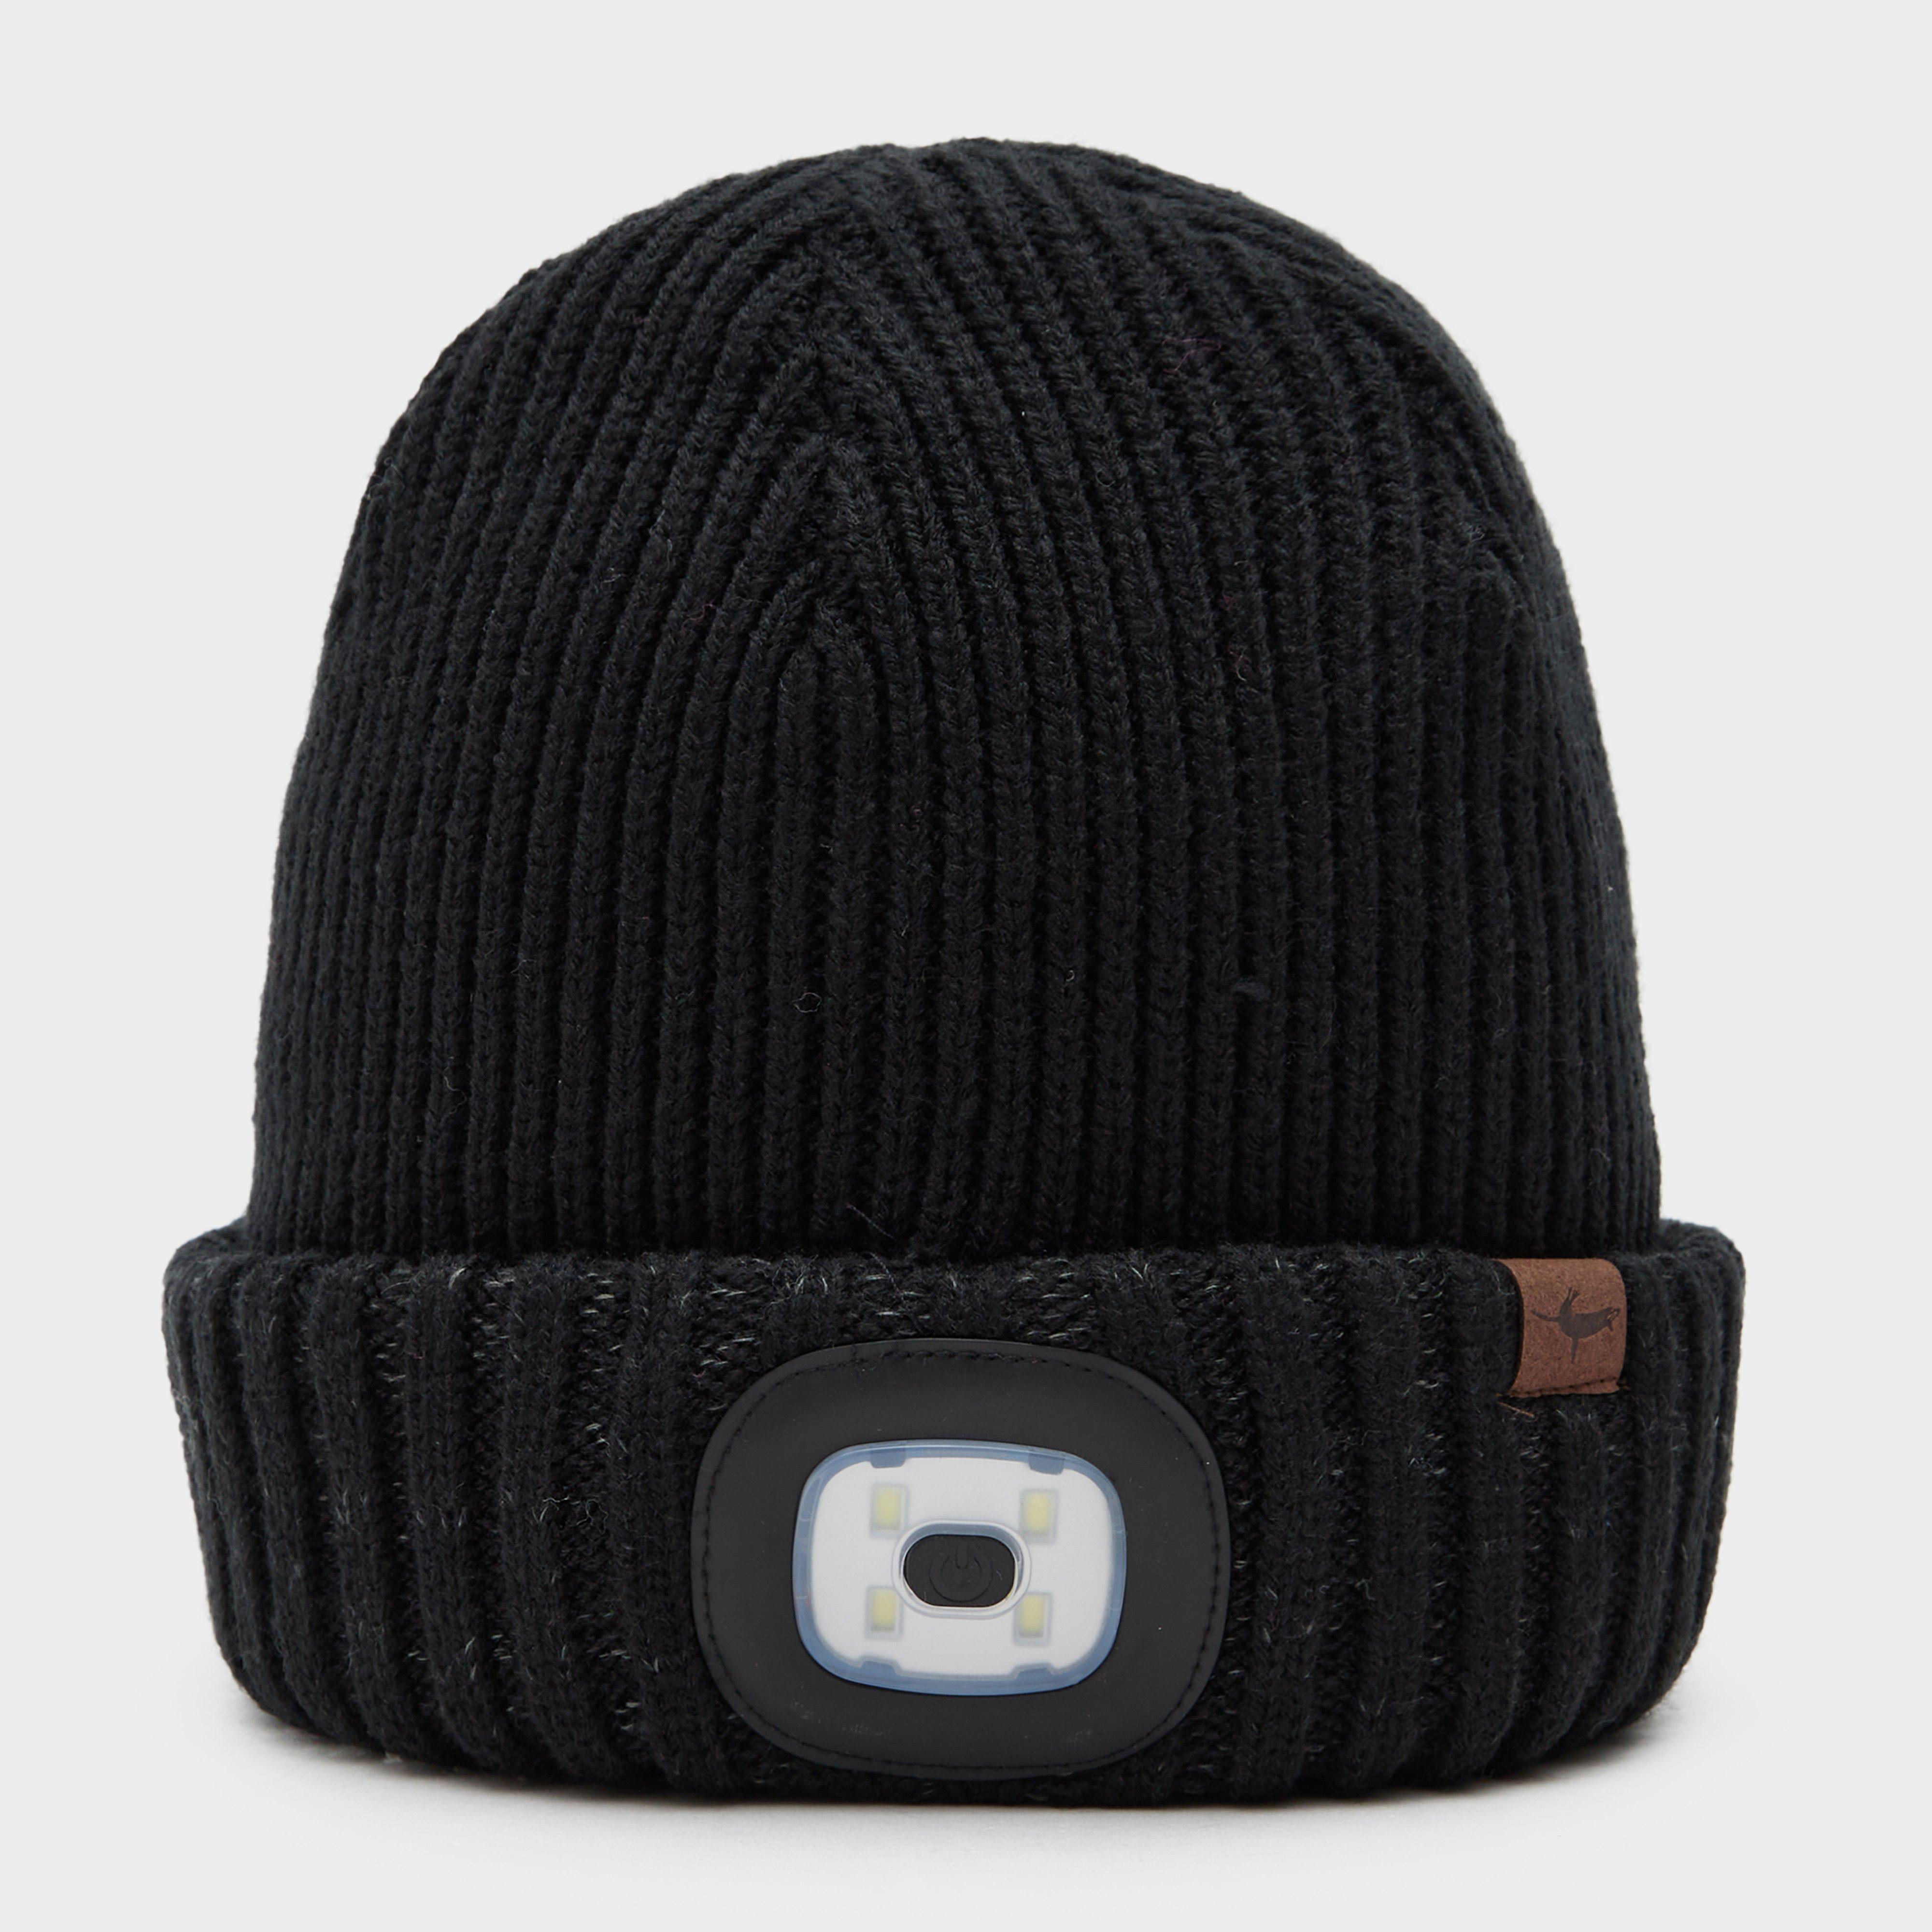 Waterproof Cold Weather Led Roll Cuff Beanie Hat - Black